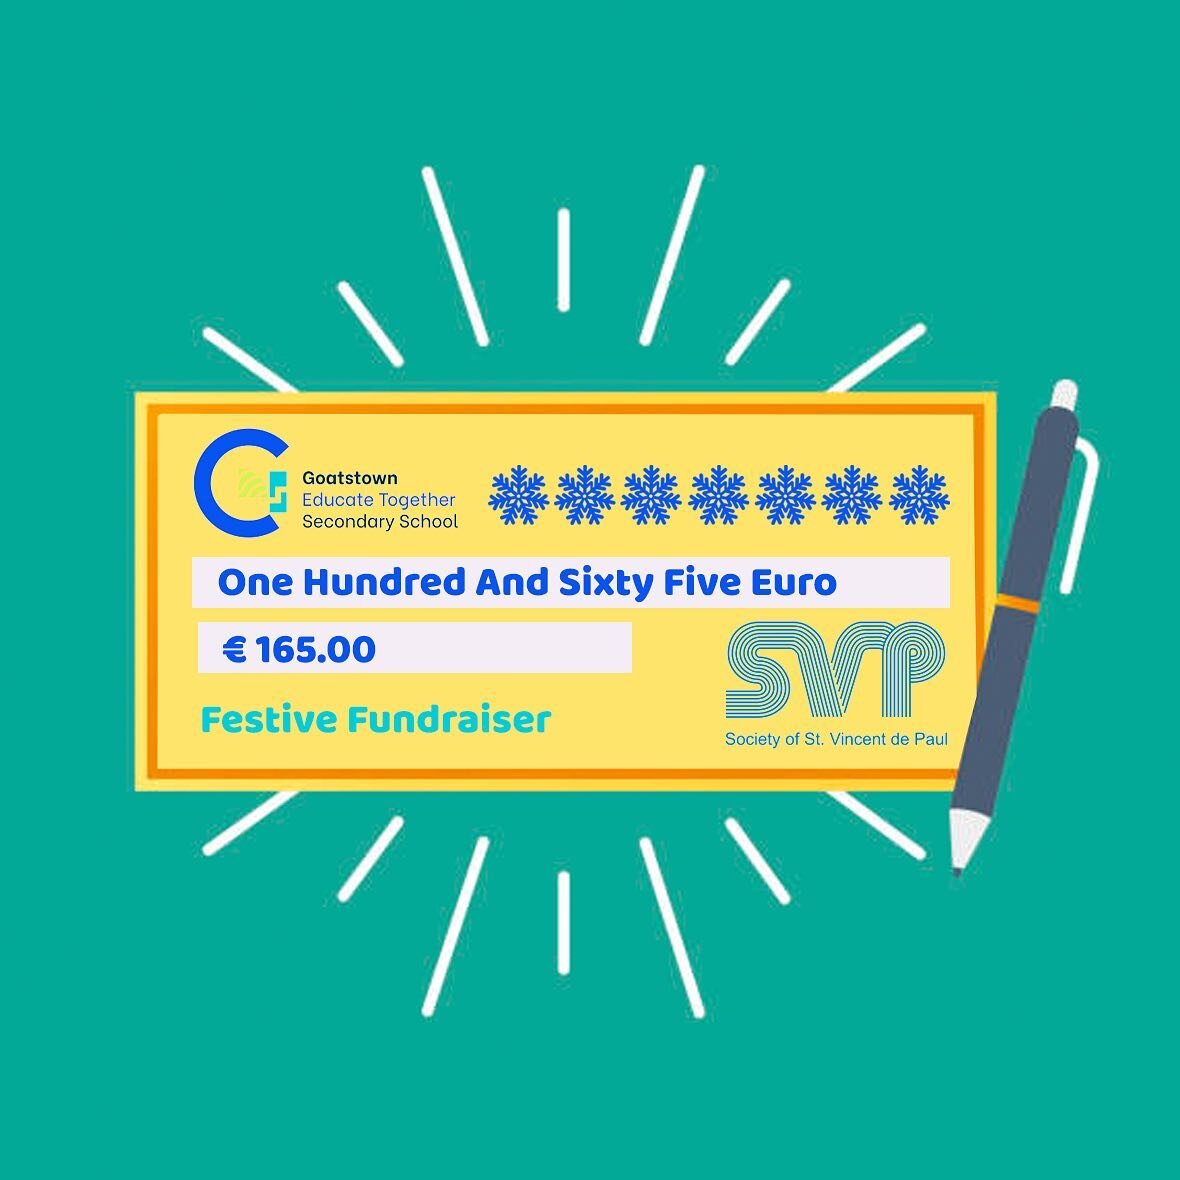 Thank you to all our staff and learners who donated to our Festive Fundraiser in aid of @svp_ireland this year. 

#GoatstownETSS #GoatstowneEucatetogetherSecondarySchool #ETSS #Dublin #DublinSchools #EducateTogether #EducateTogetherDublin